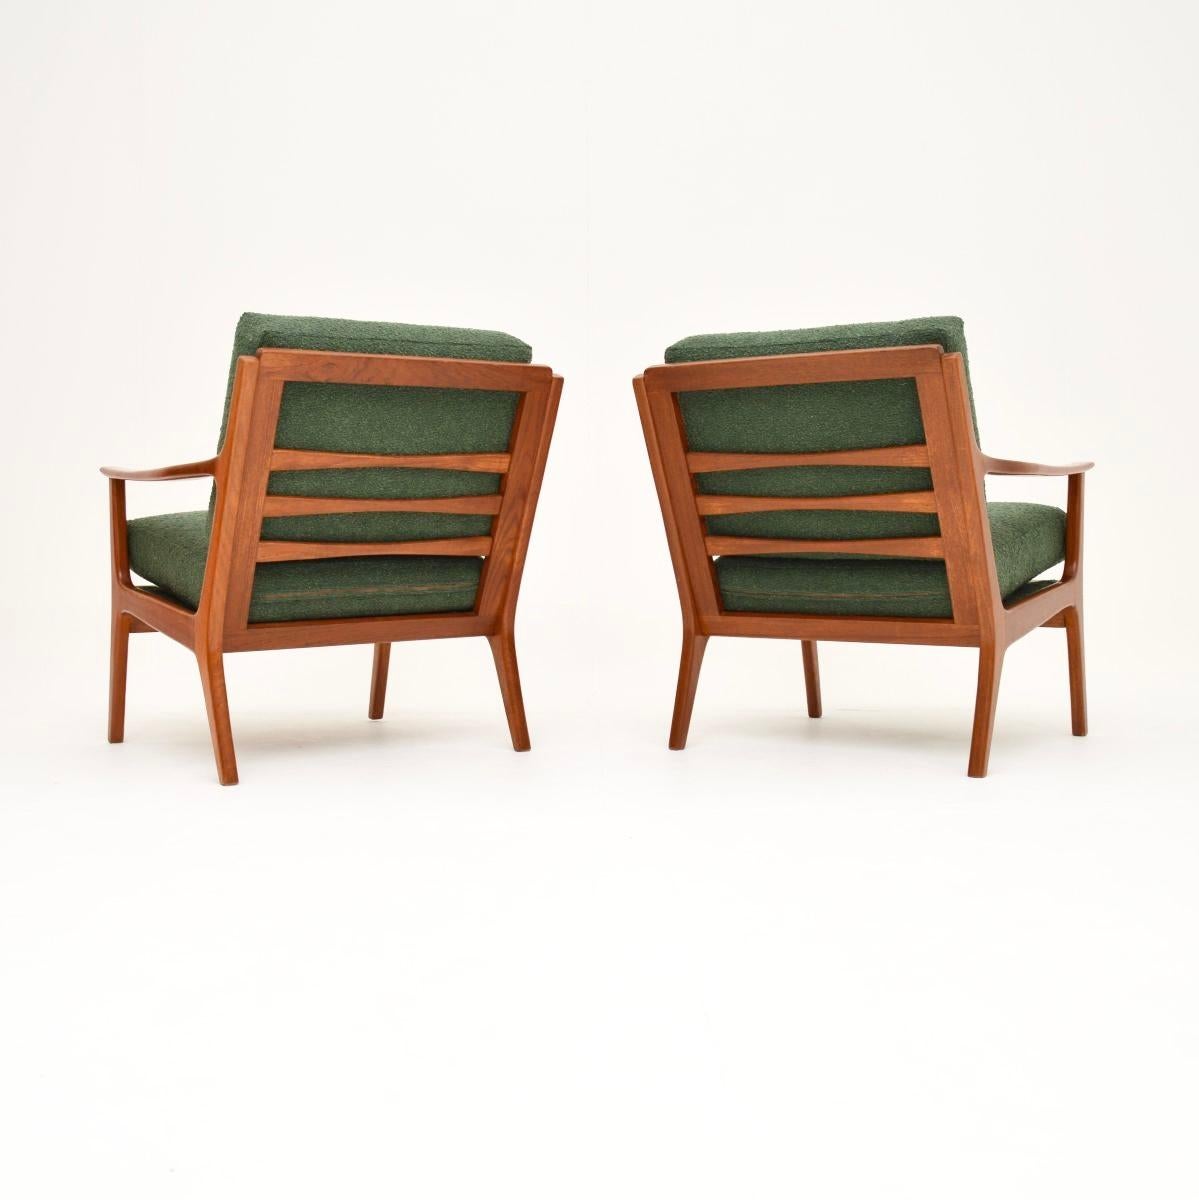 Pair of Vintage Danish Teak Armchairs In Good Condition For Sale In London, GB